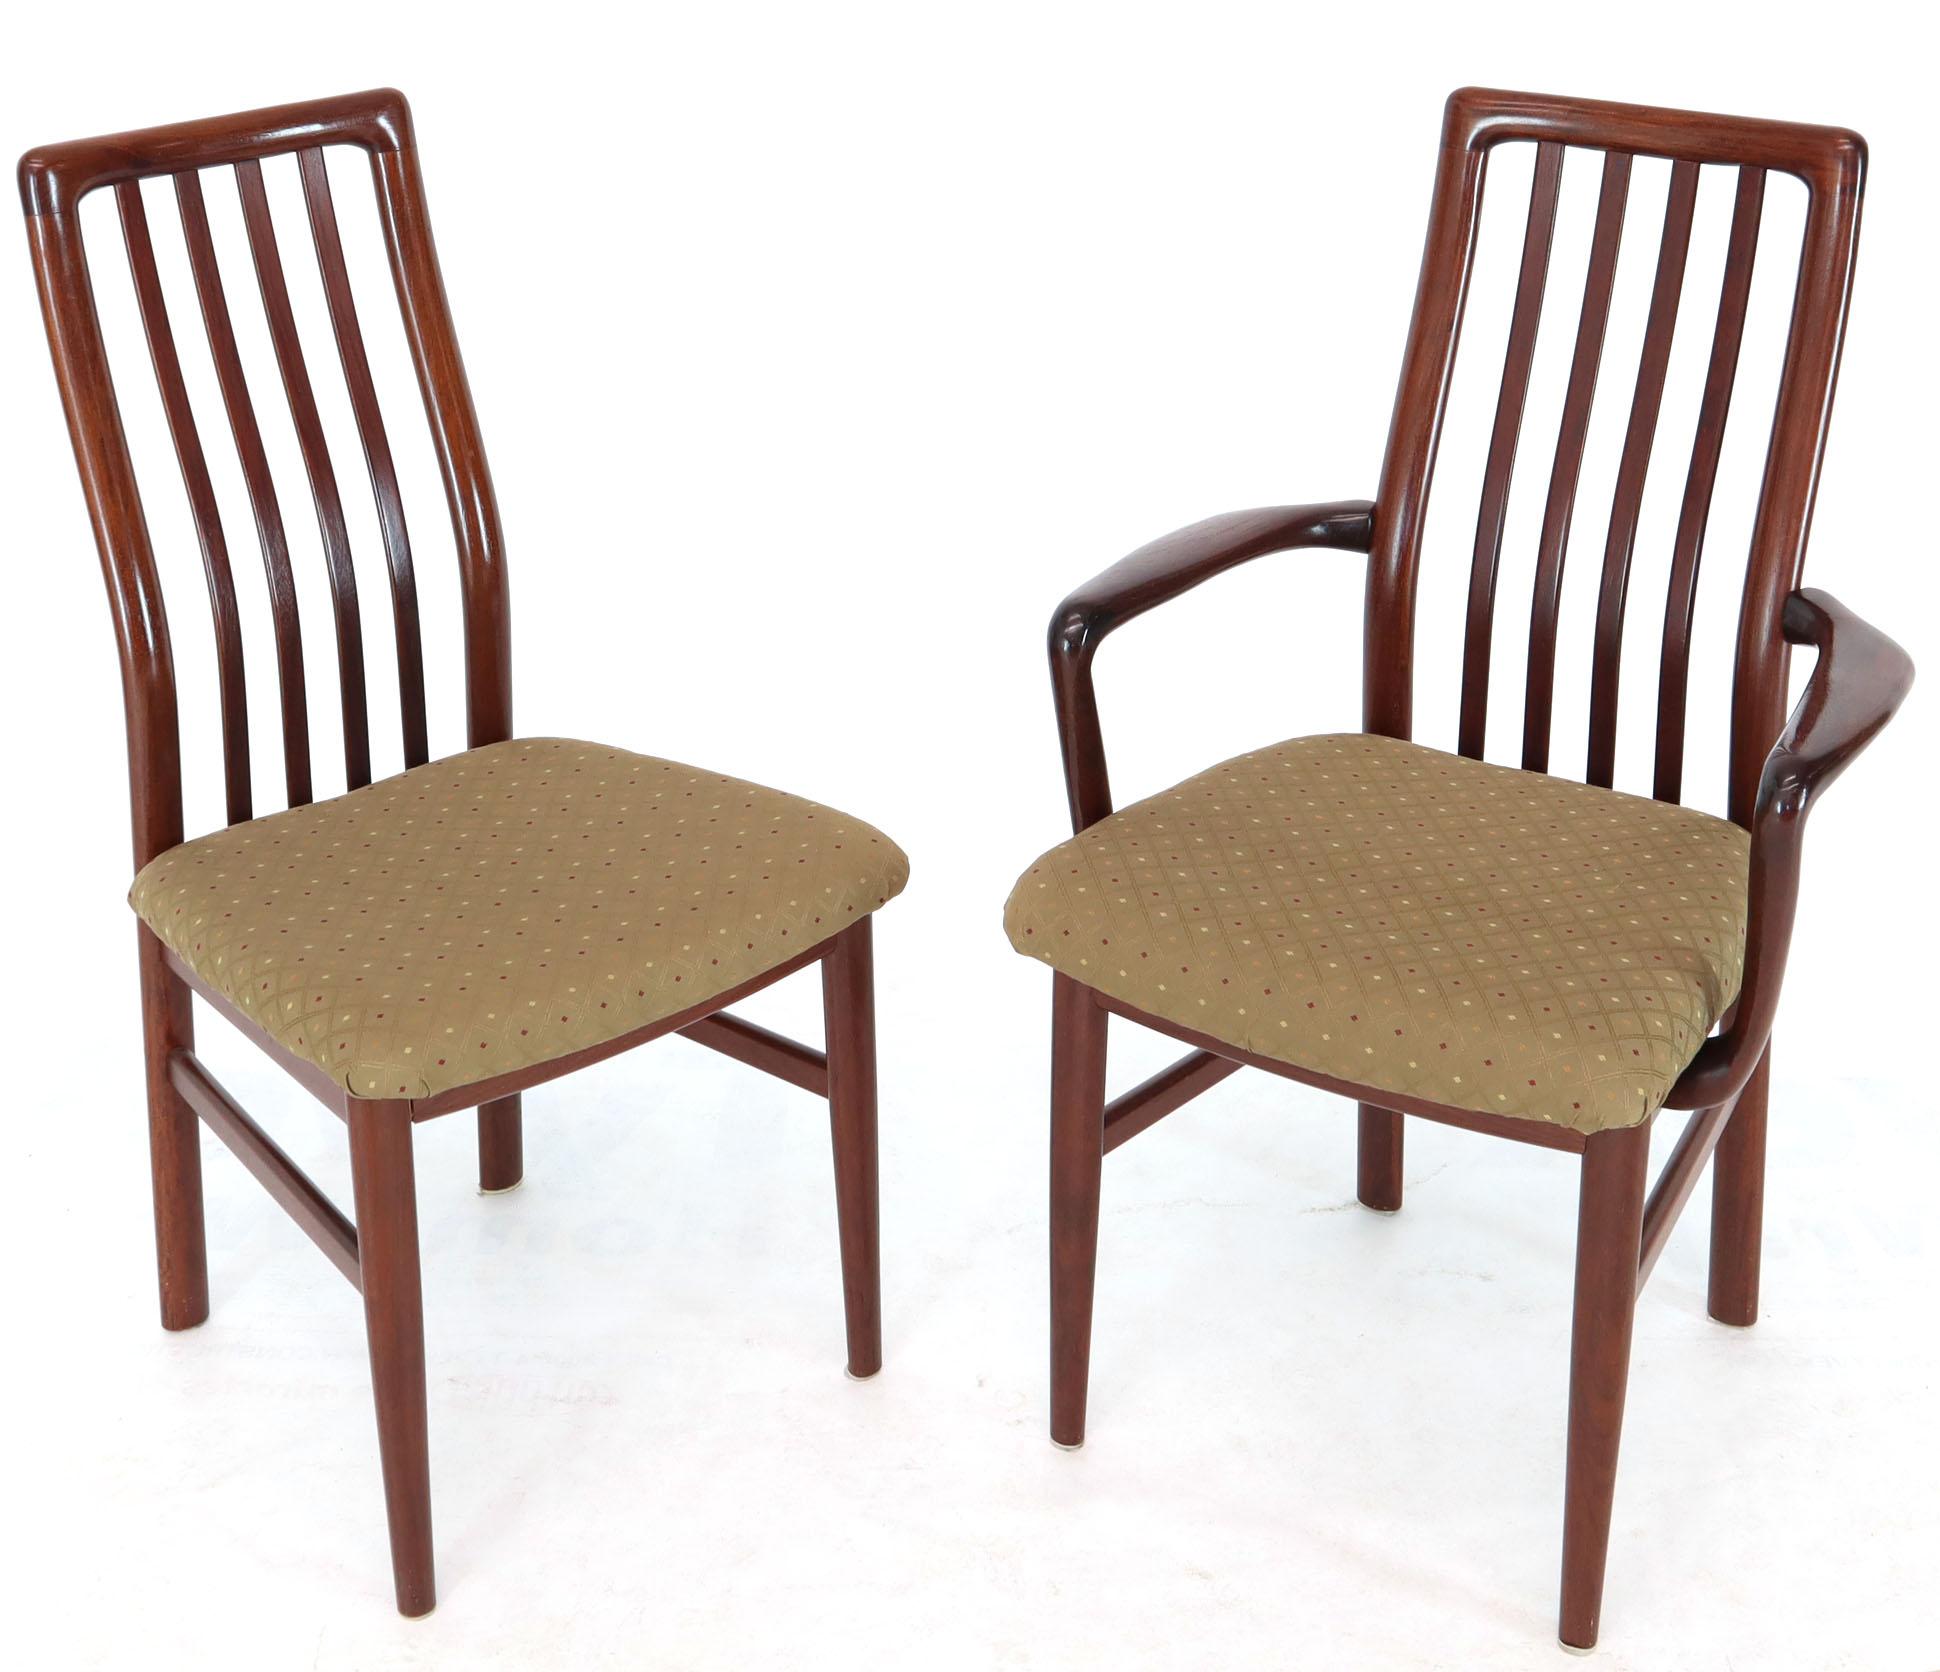 Set of six Danish Mid-Century Modern rosewood dining chairs. High quality rock solid rosewood frames. The armchairs measure 22